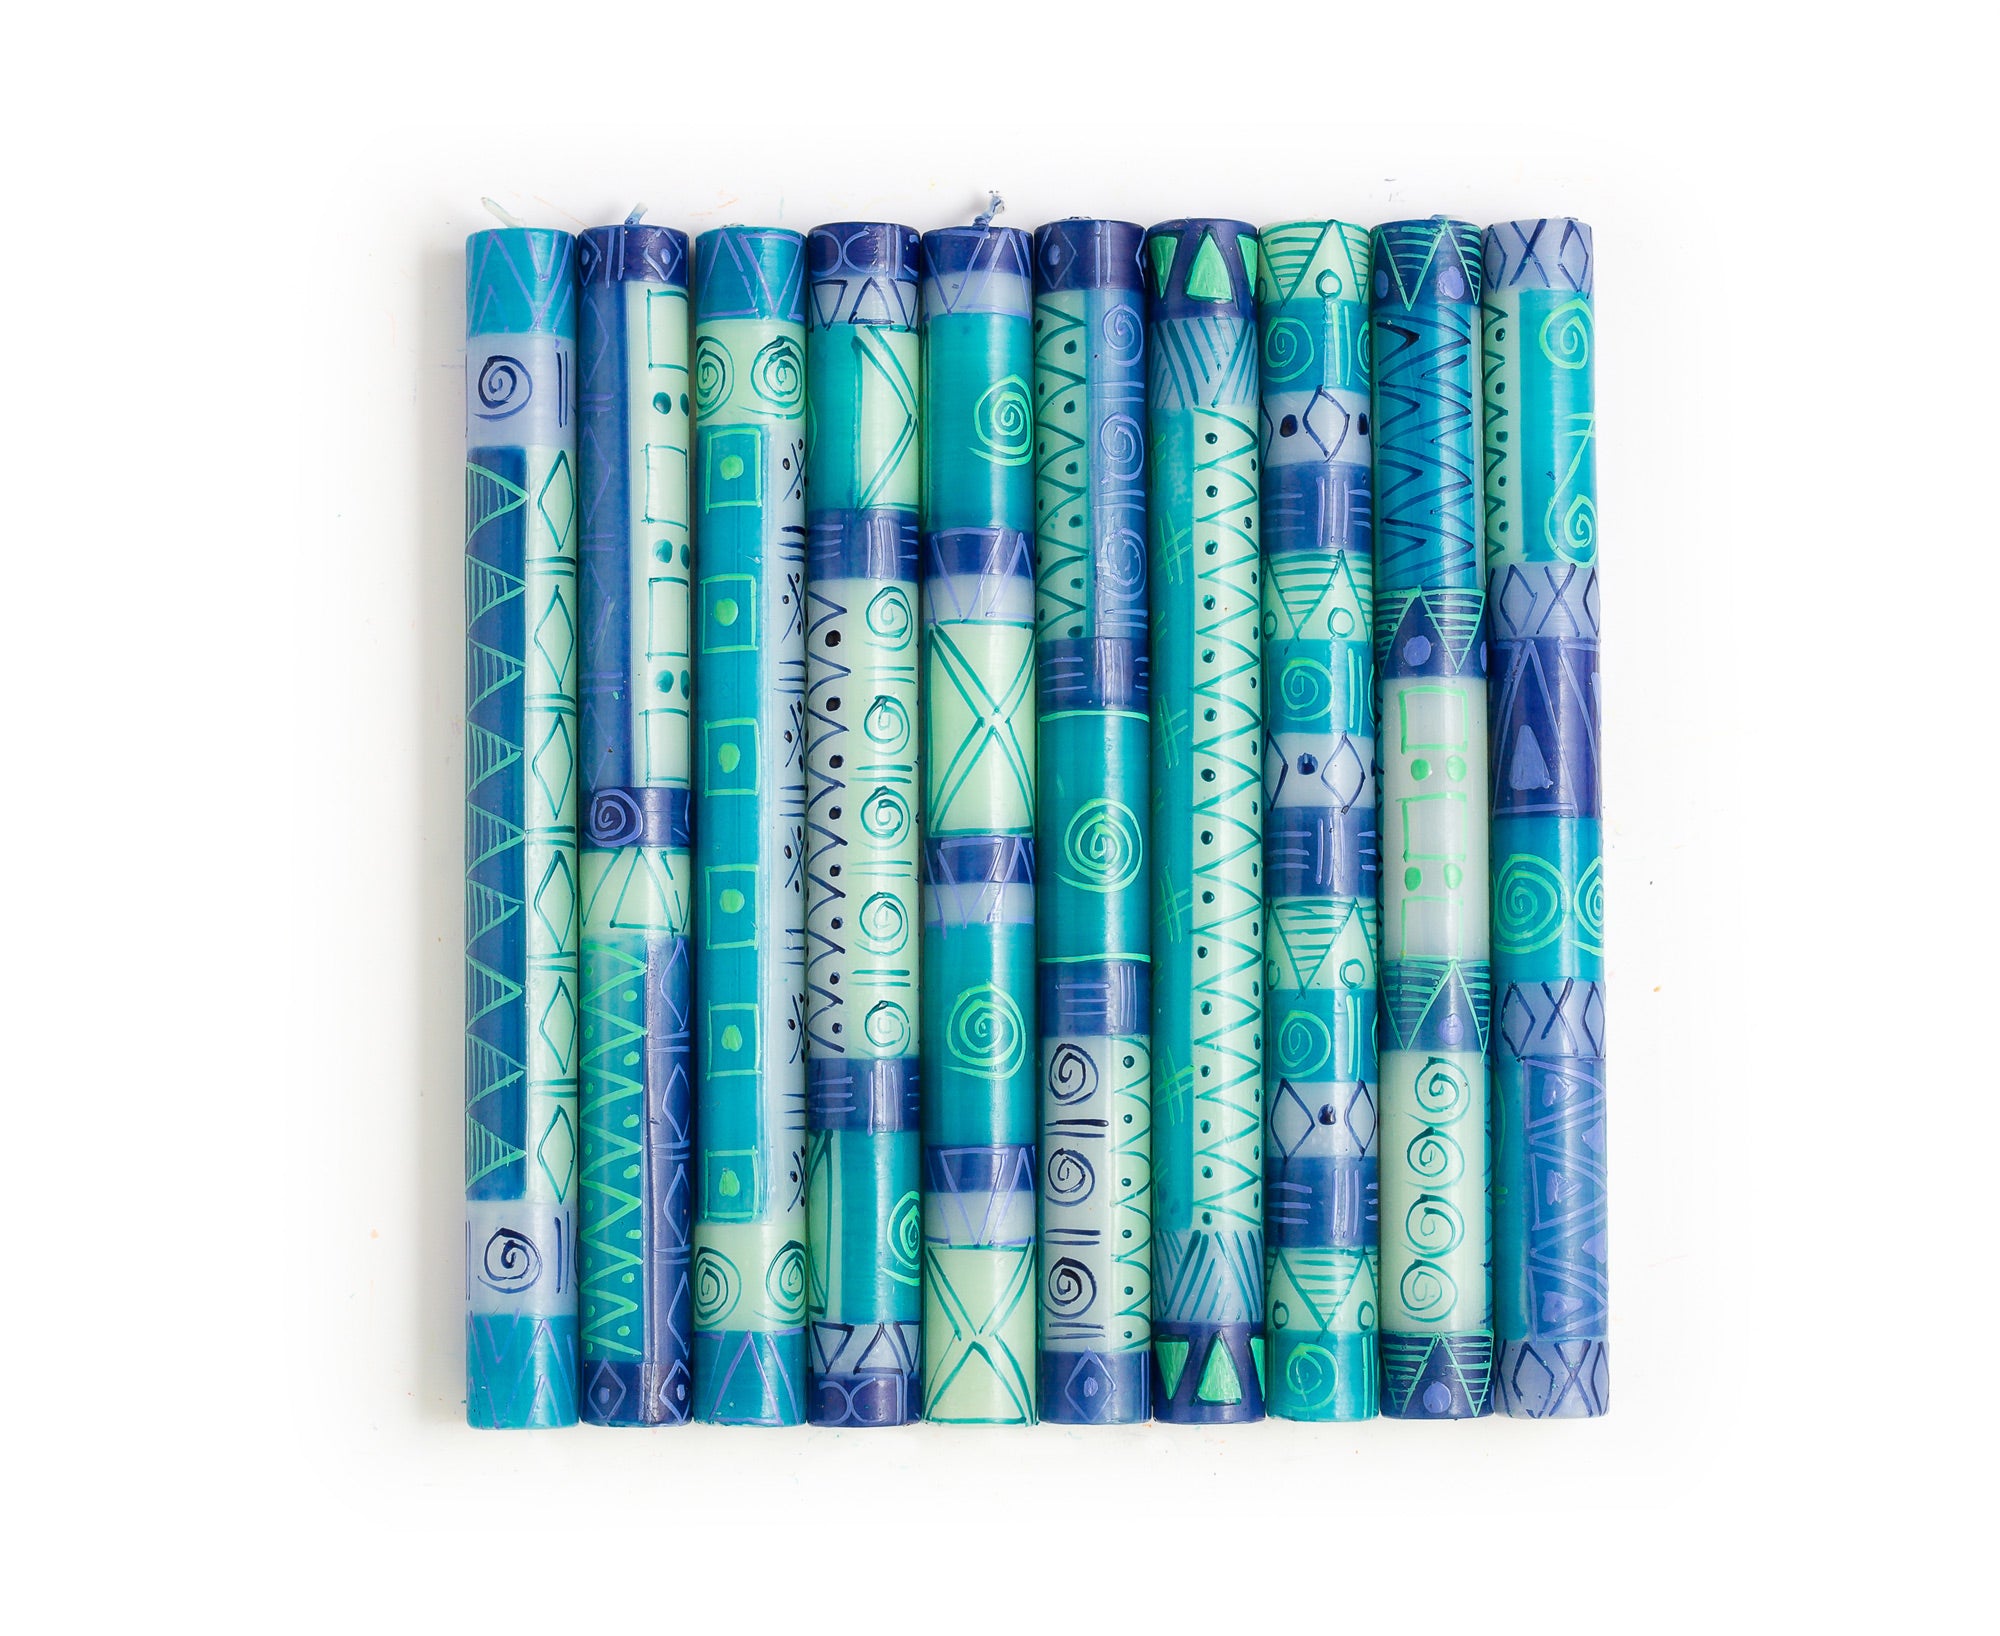 10 Blue & Green tapers showing the 10 designs of the collection